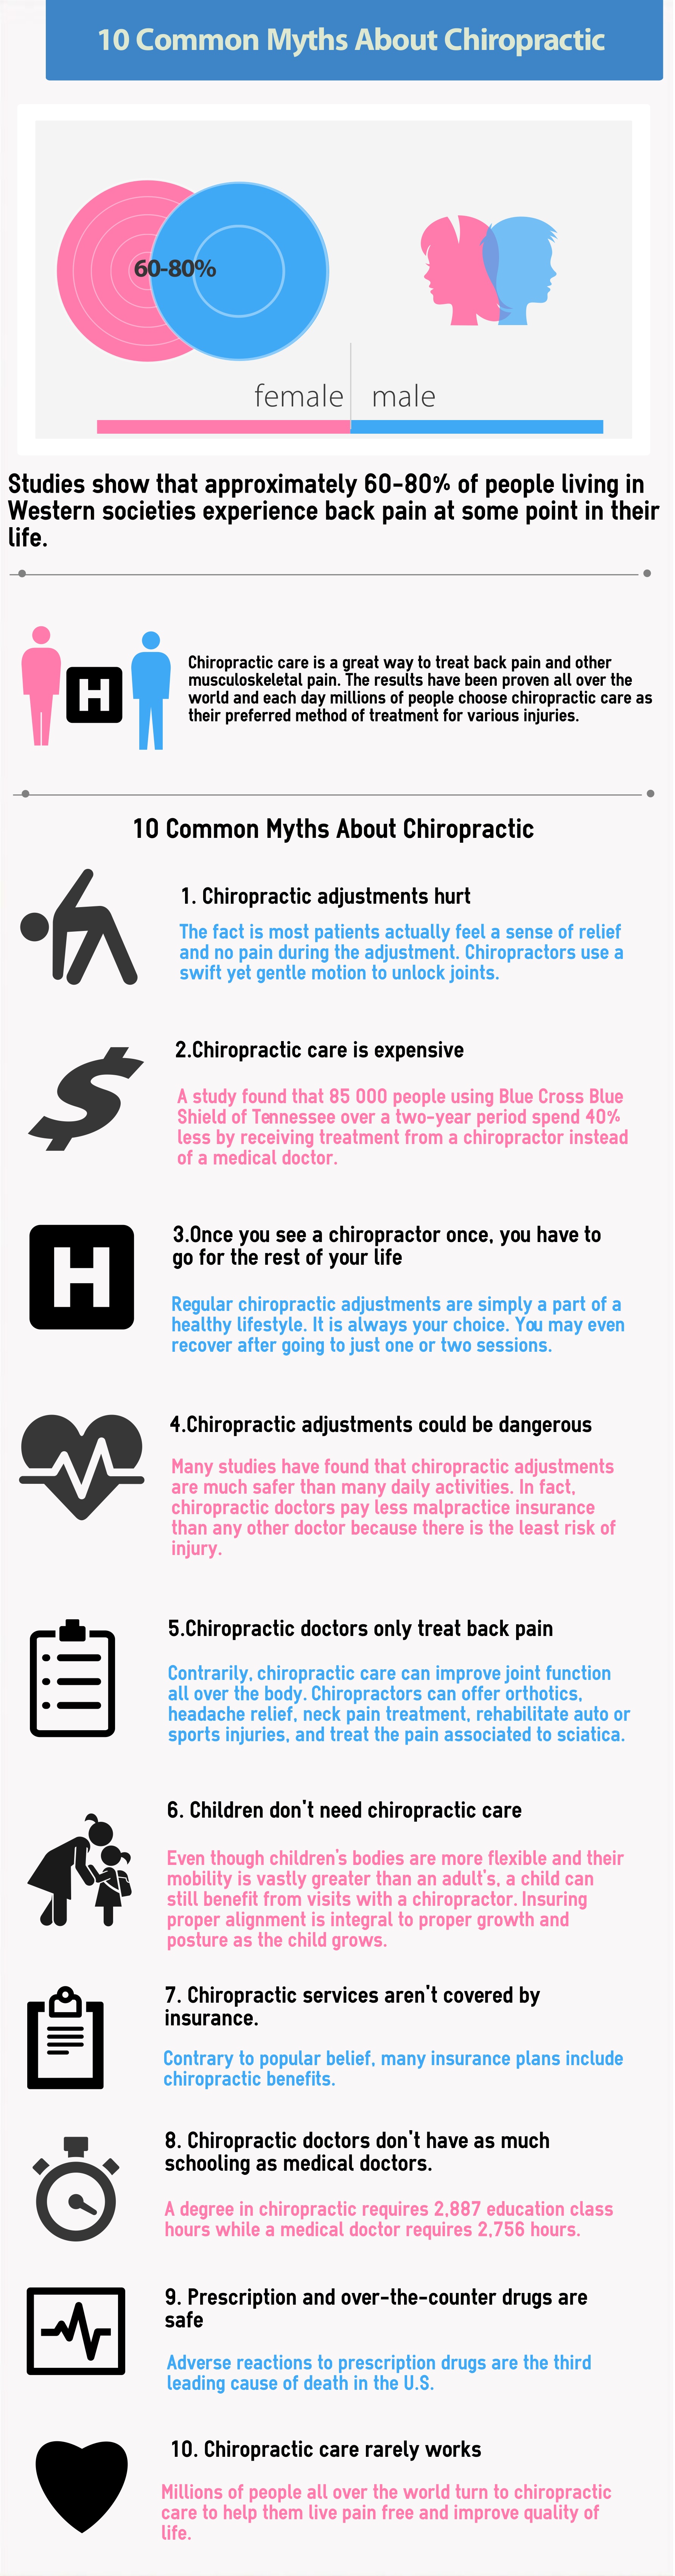 chiropractic myths infographic